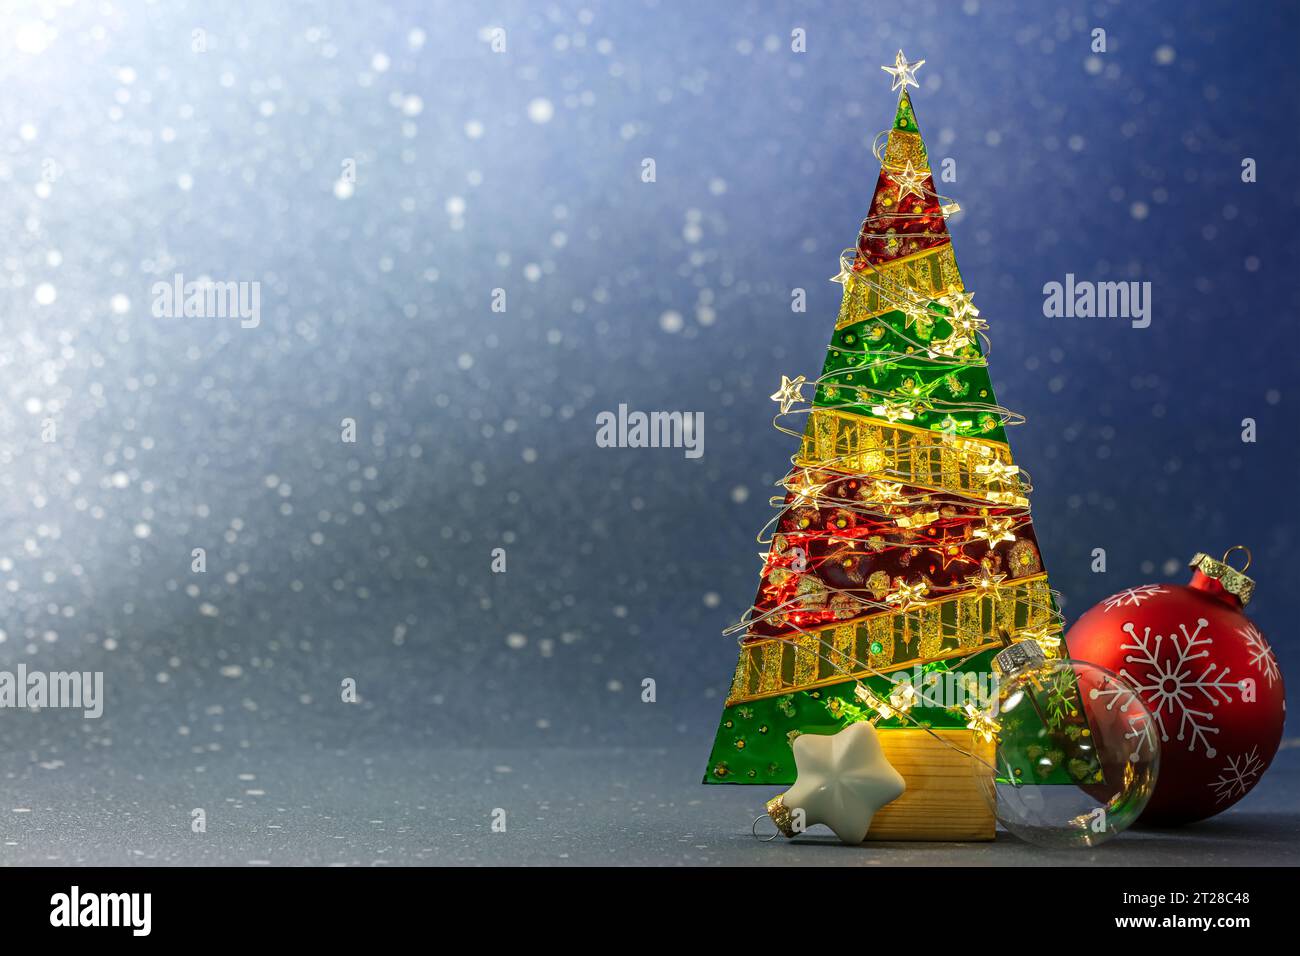 glass christmas tree with festive garland lights and new year balls on blurred blue background. Stock Photo